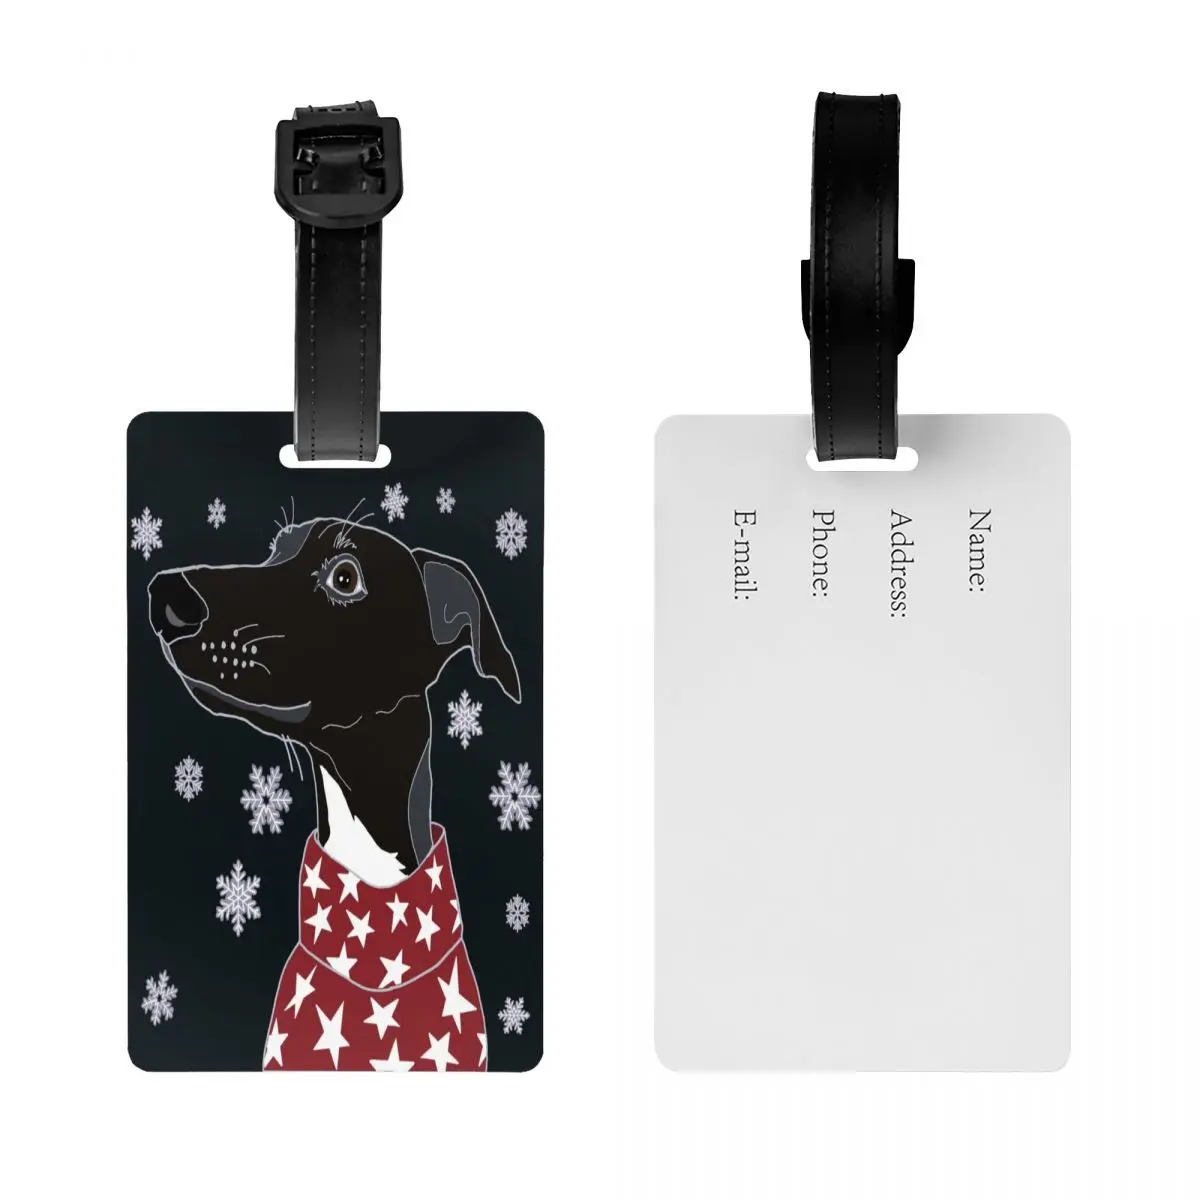 Custom Cute Winter Whippet Luggage Tag With Name Card Lurcher Greyhound Dog Privacy Cover ID Label for Travel Bag Suitcase